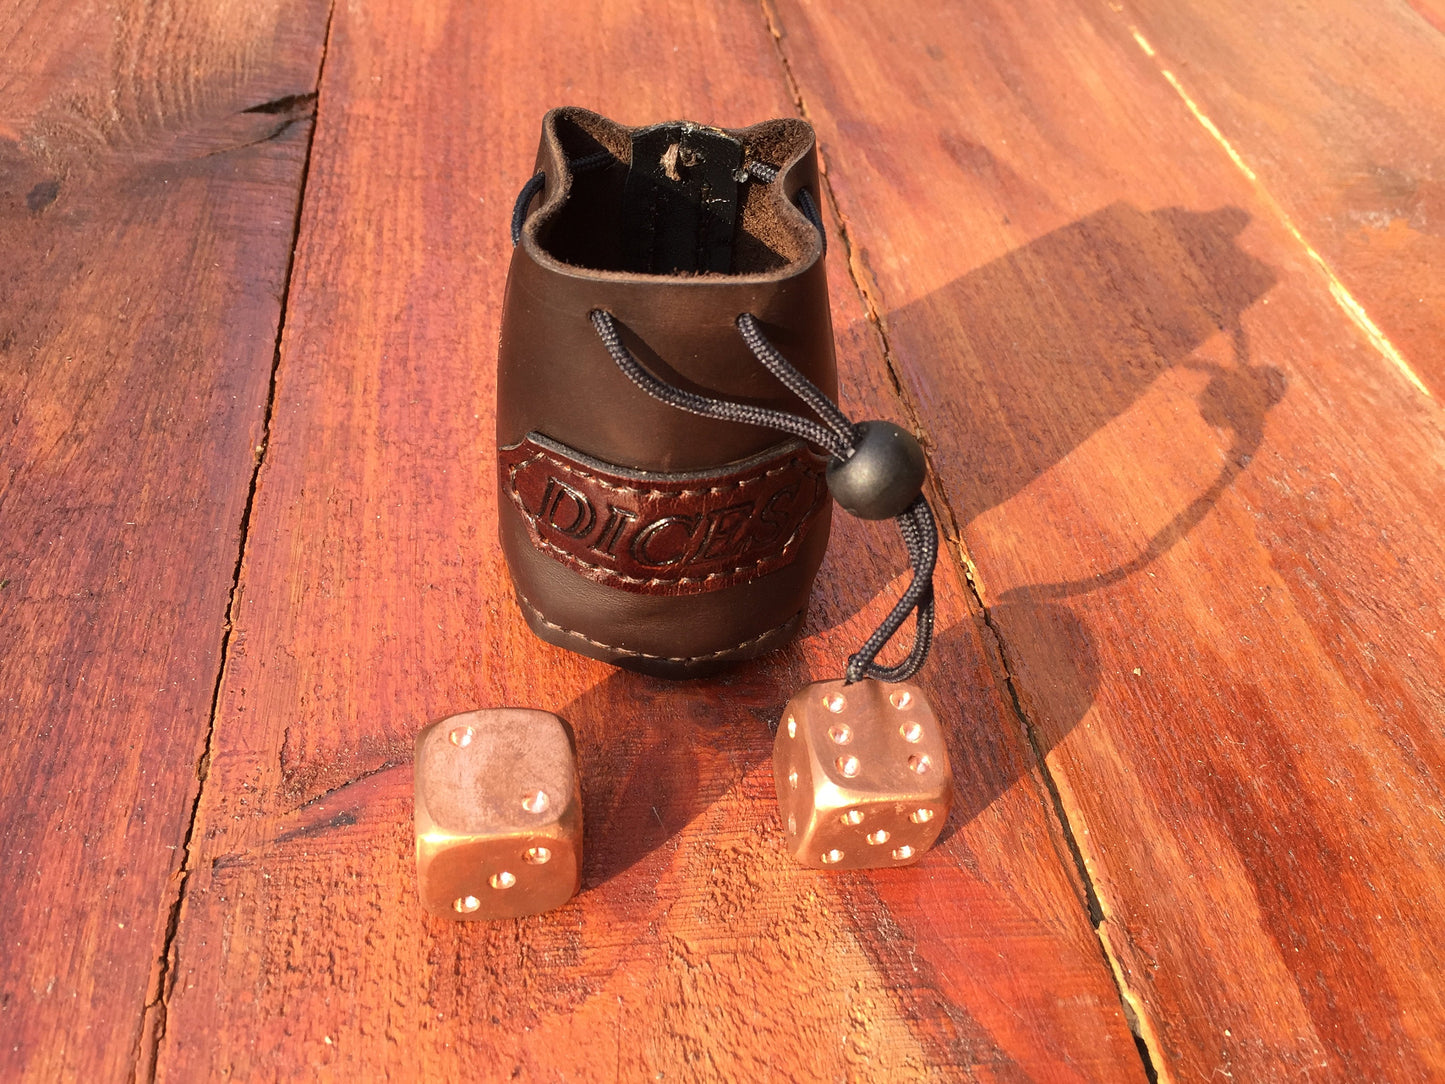 Copper dices, copper anniversary gift, copper gift, hand forged dices, 7 year gift, blacksmith dices, dice set, tabletop game, board game